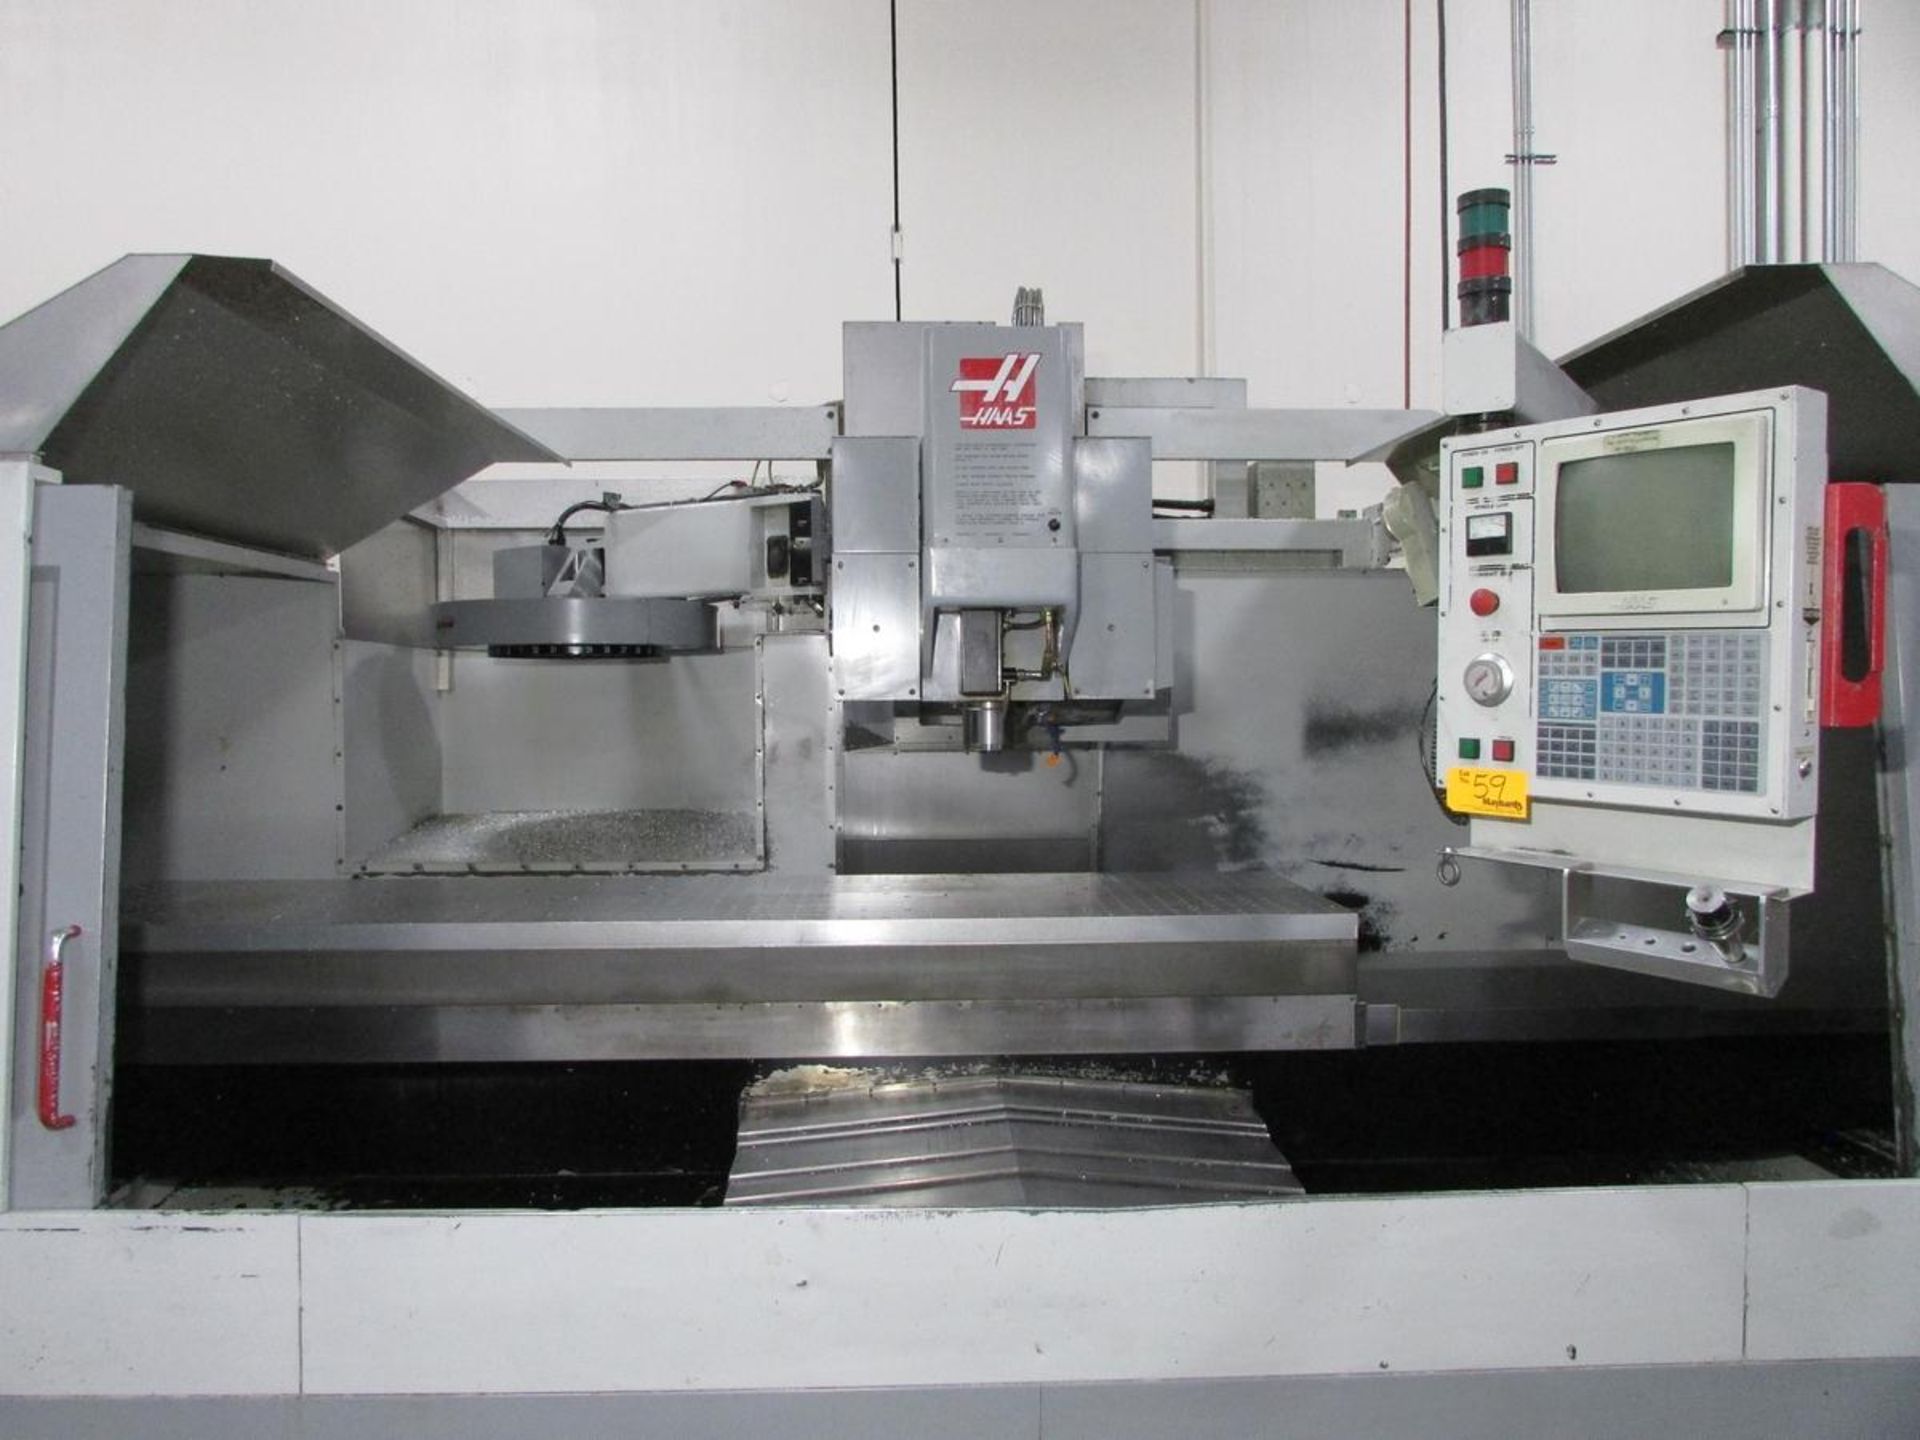 1997 Haas VR-11 5-Axis CNC Vertical Maching Center - Image 5 of 30